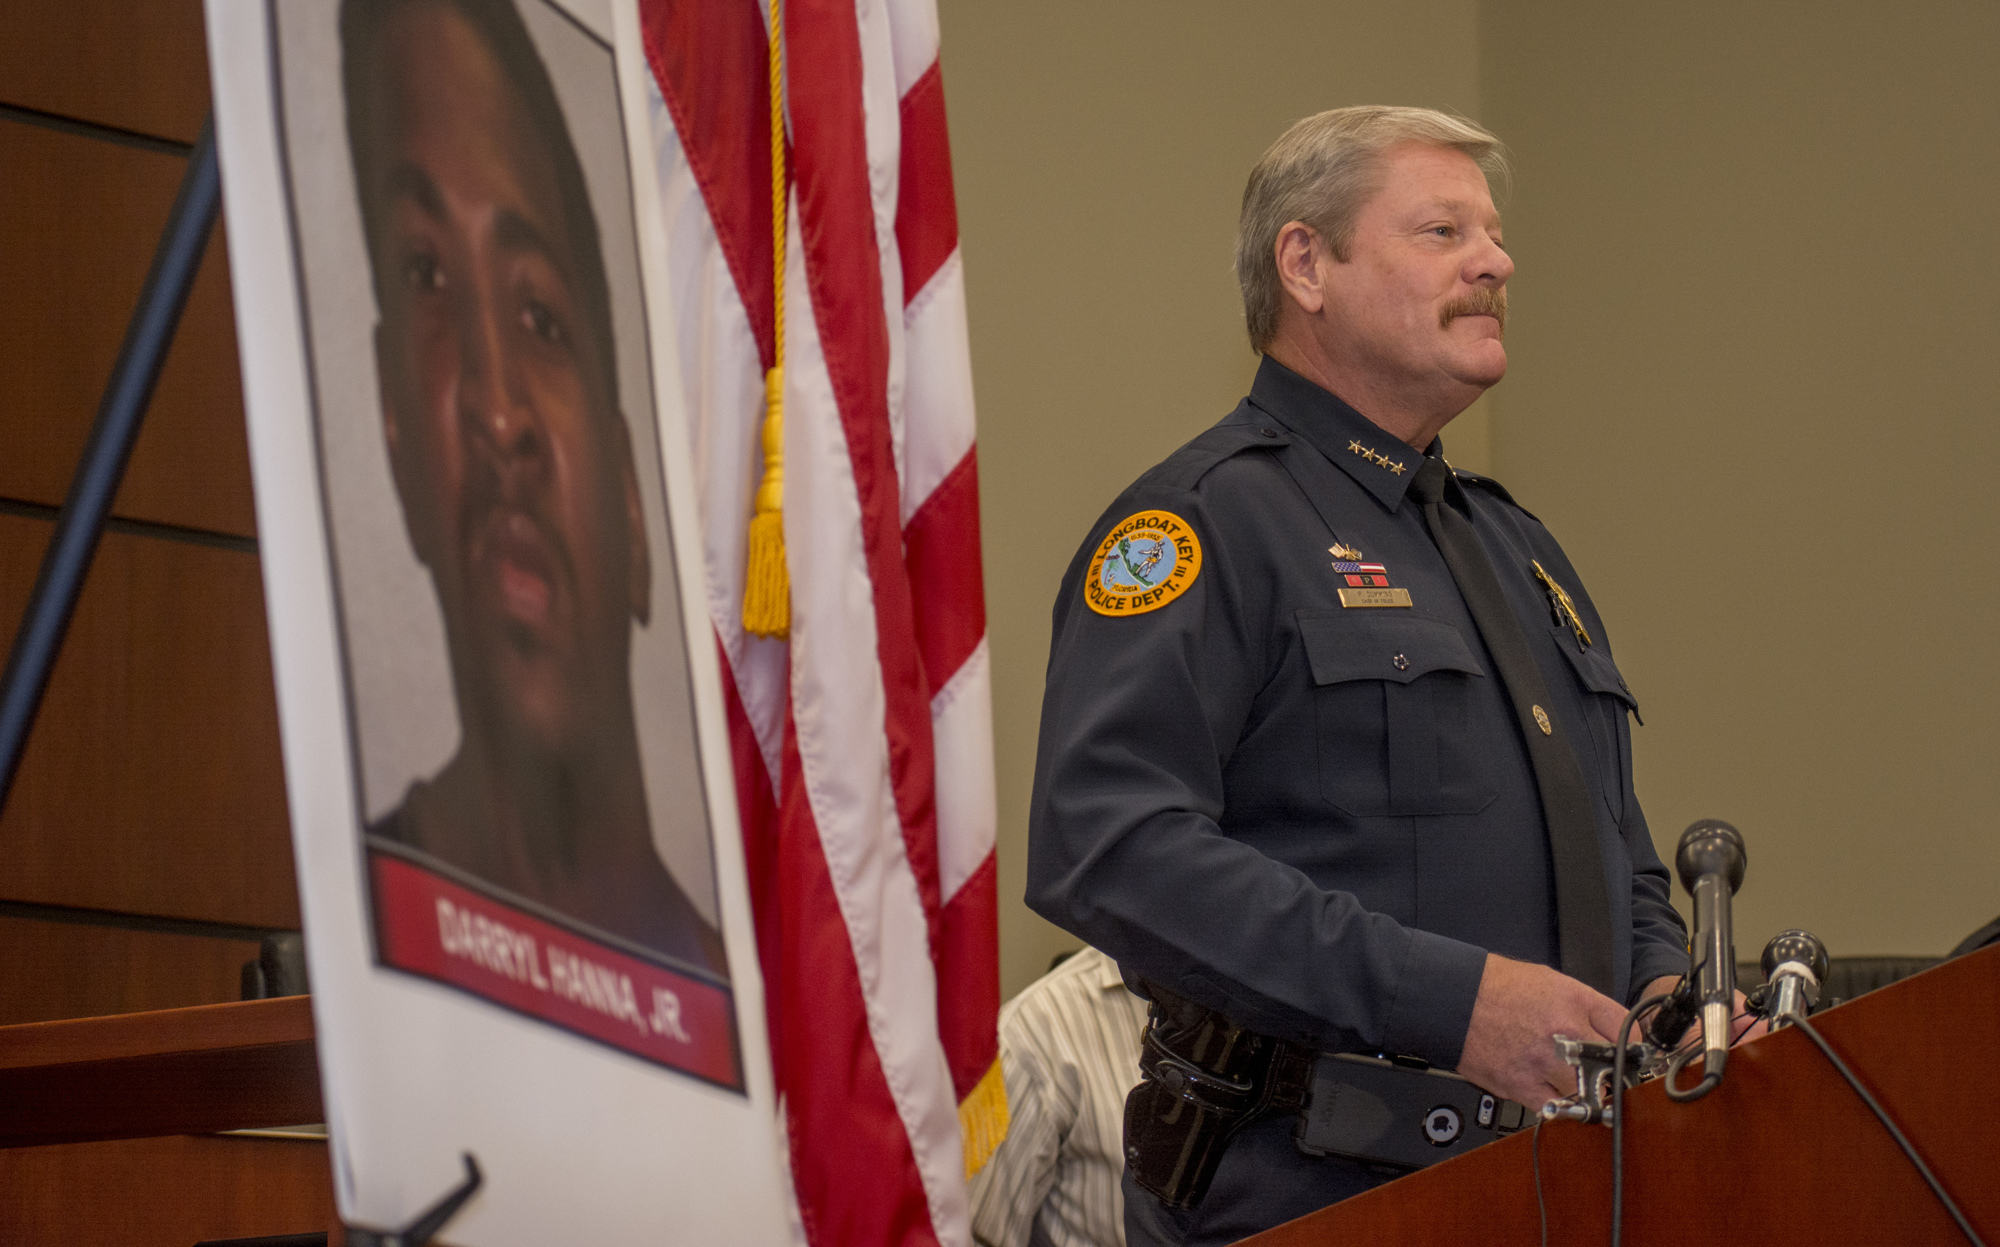 Longboat Police Chief Pete Cumming speaks during a press conference announcing the arrest Darryl Hanna. Jr.